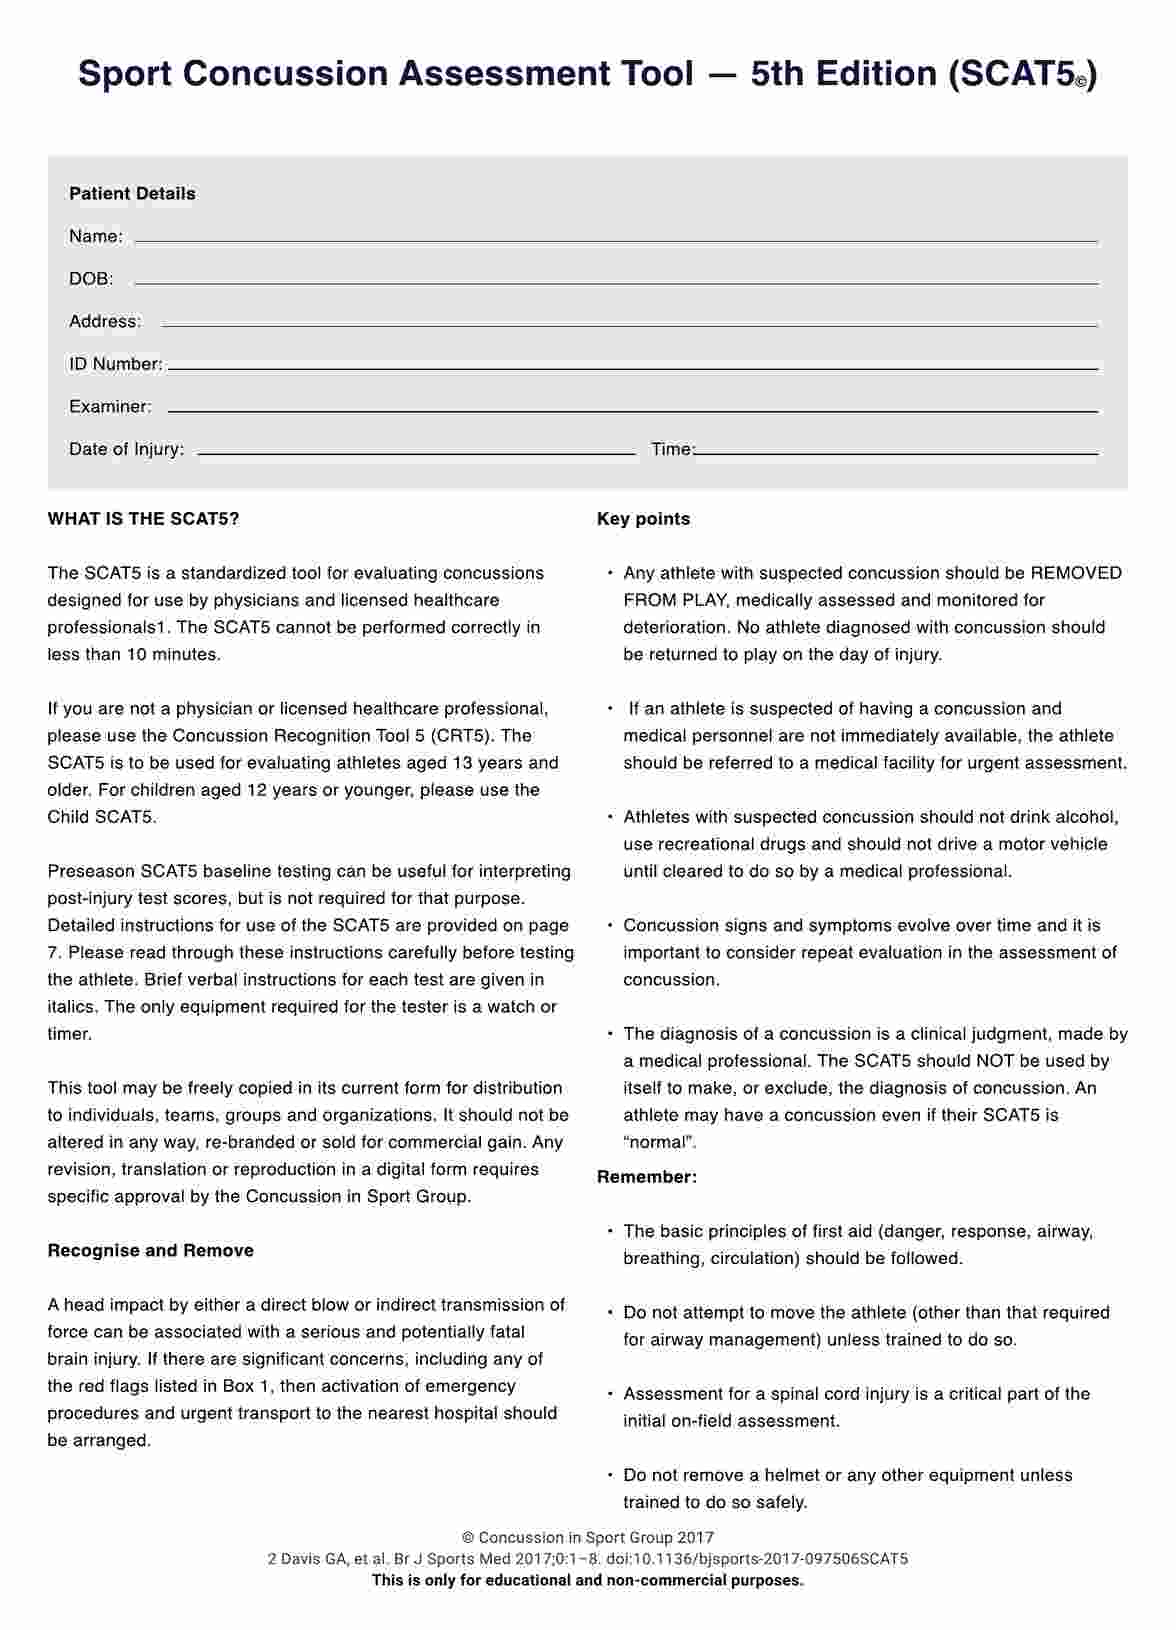 Sport Concussion Assessment Tool - 5th Edition (SCAT5) PDF Example